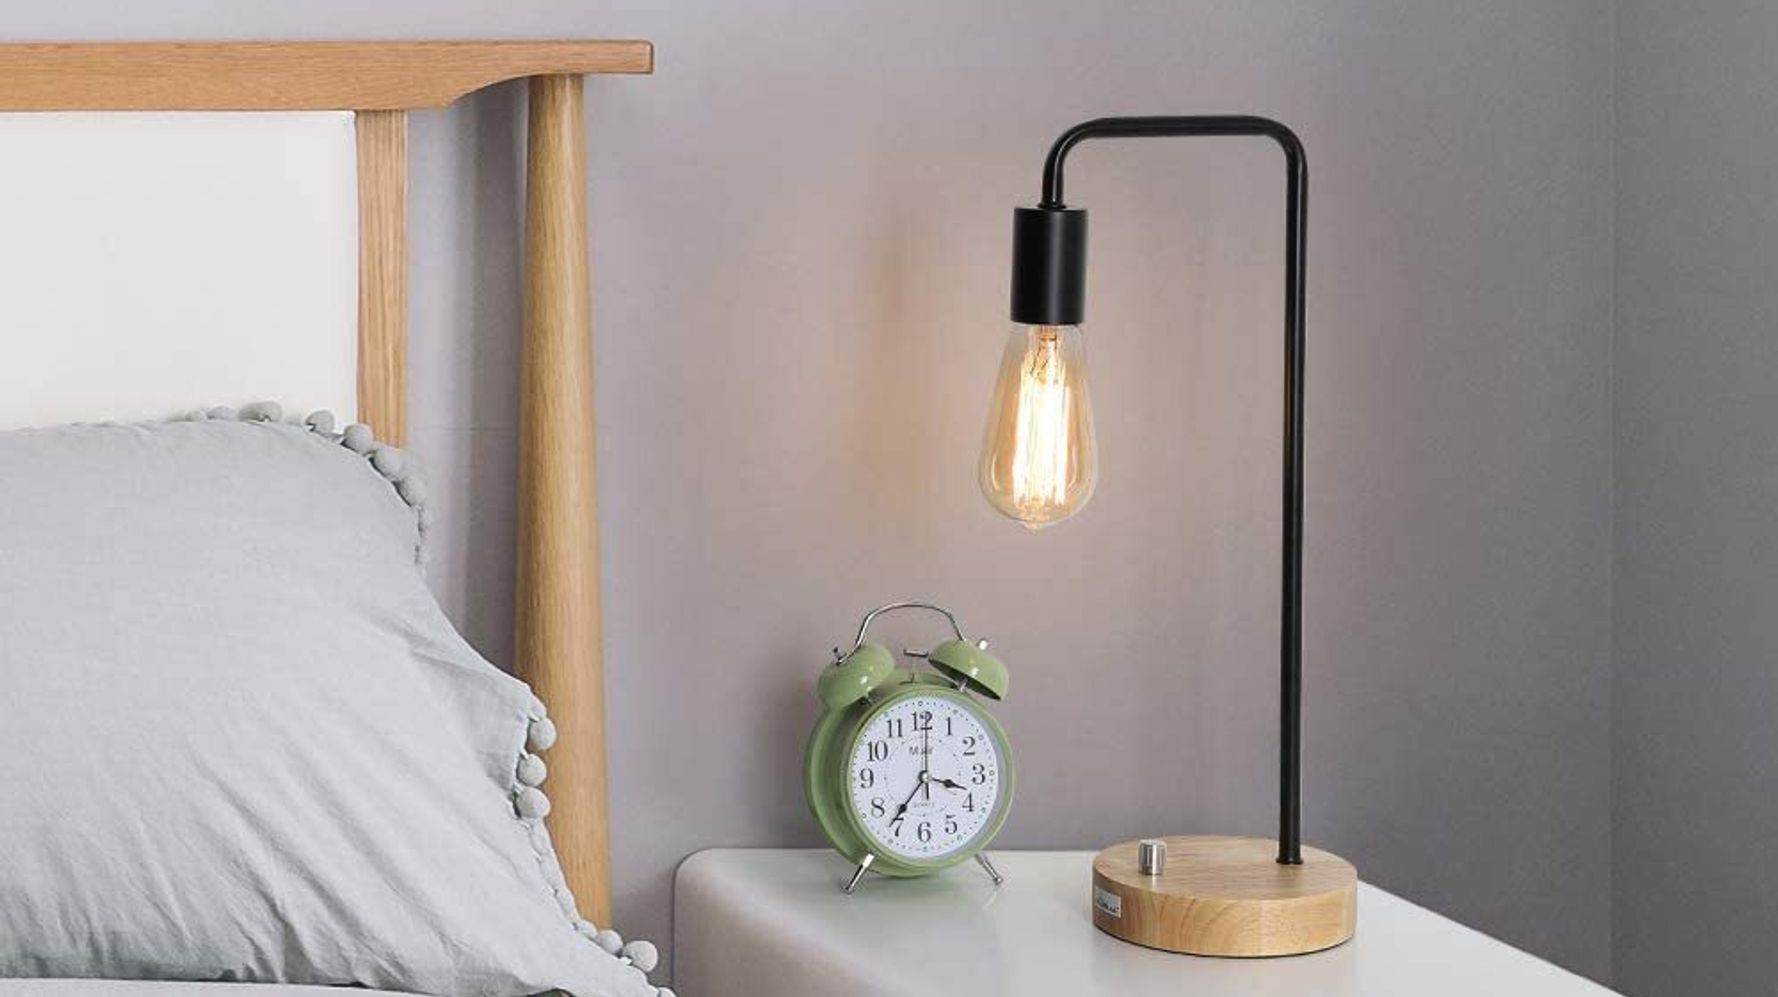 27 Things Under $50 You'll Want To Buy For Your Home